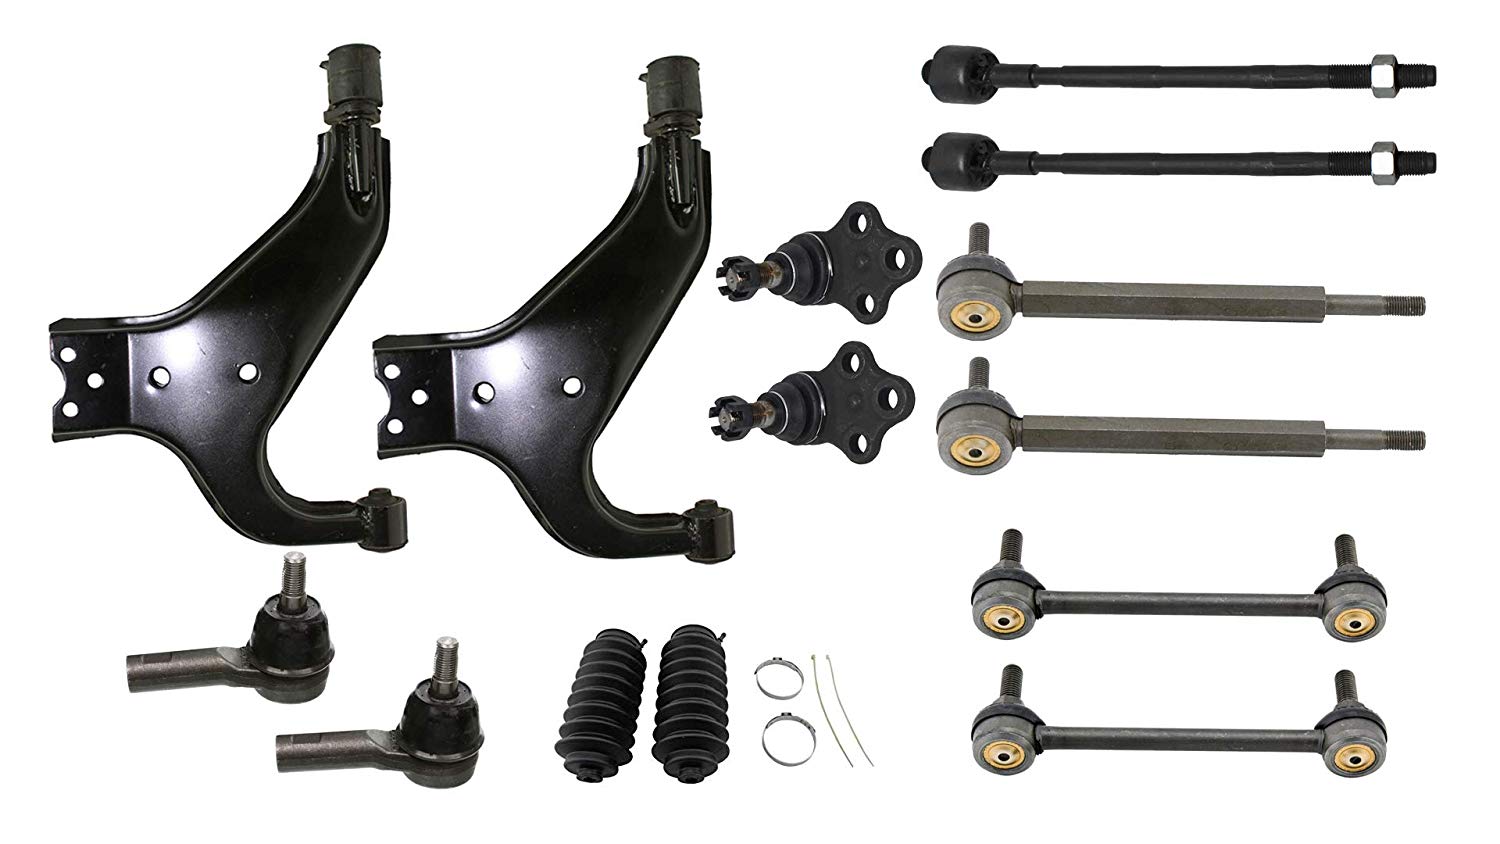 Detroit Axle - 14pc Front Lower Control Arms w/Ball joint & Tierods & Sway Bars & Rack Boots for 1996-2004 Nissan Pathfinder - [1997-2003 Infiniti QX4]